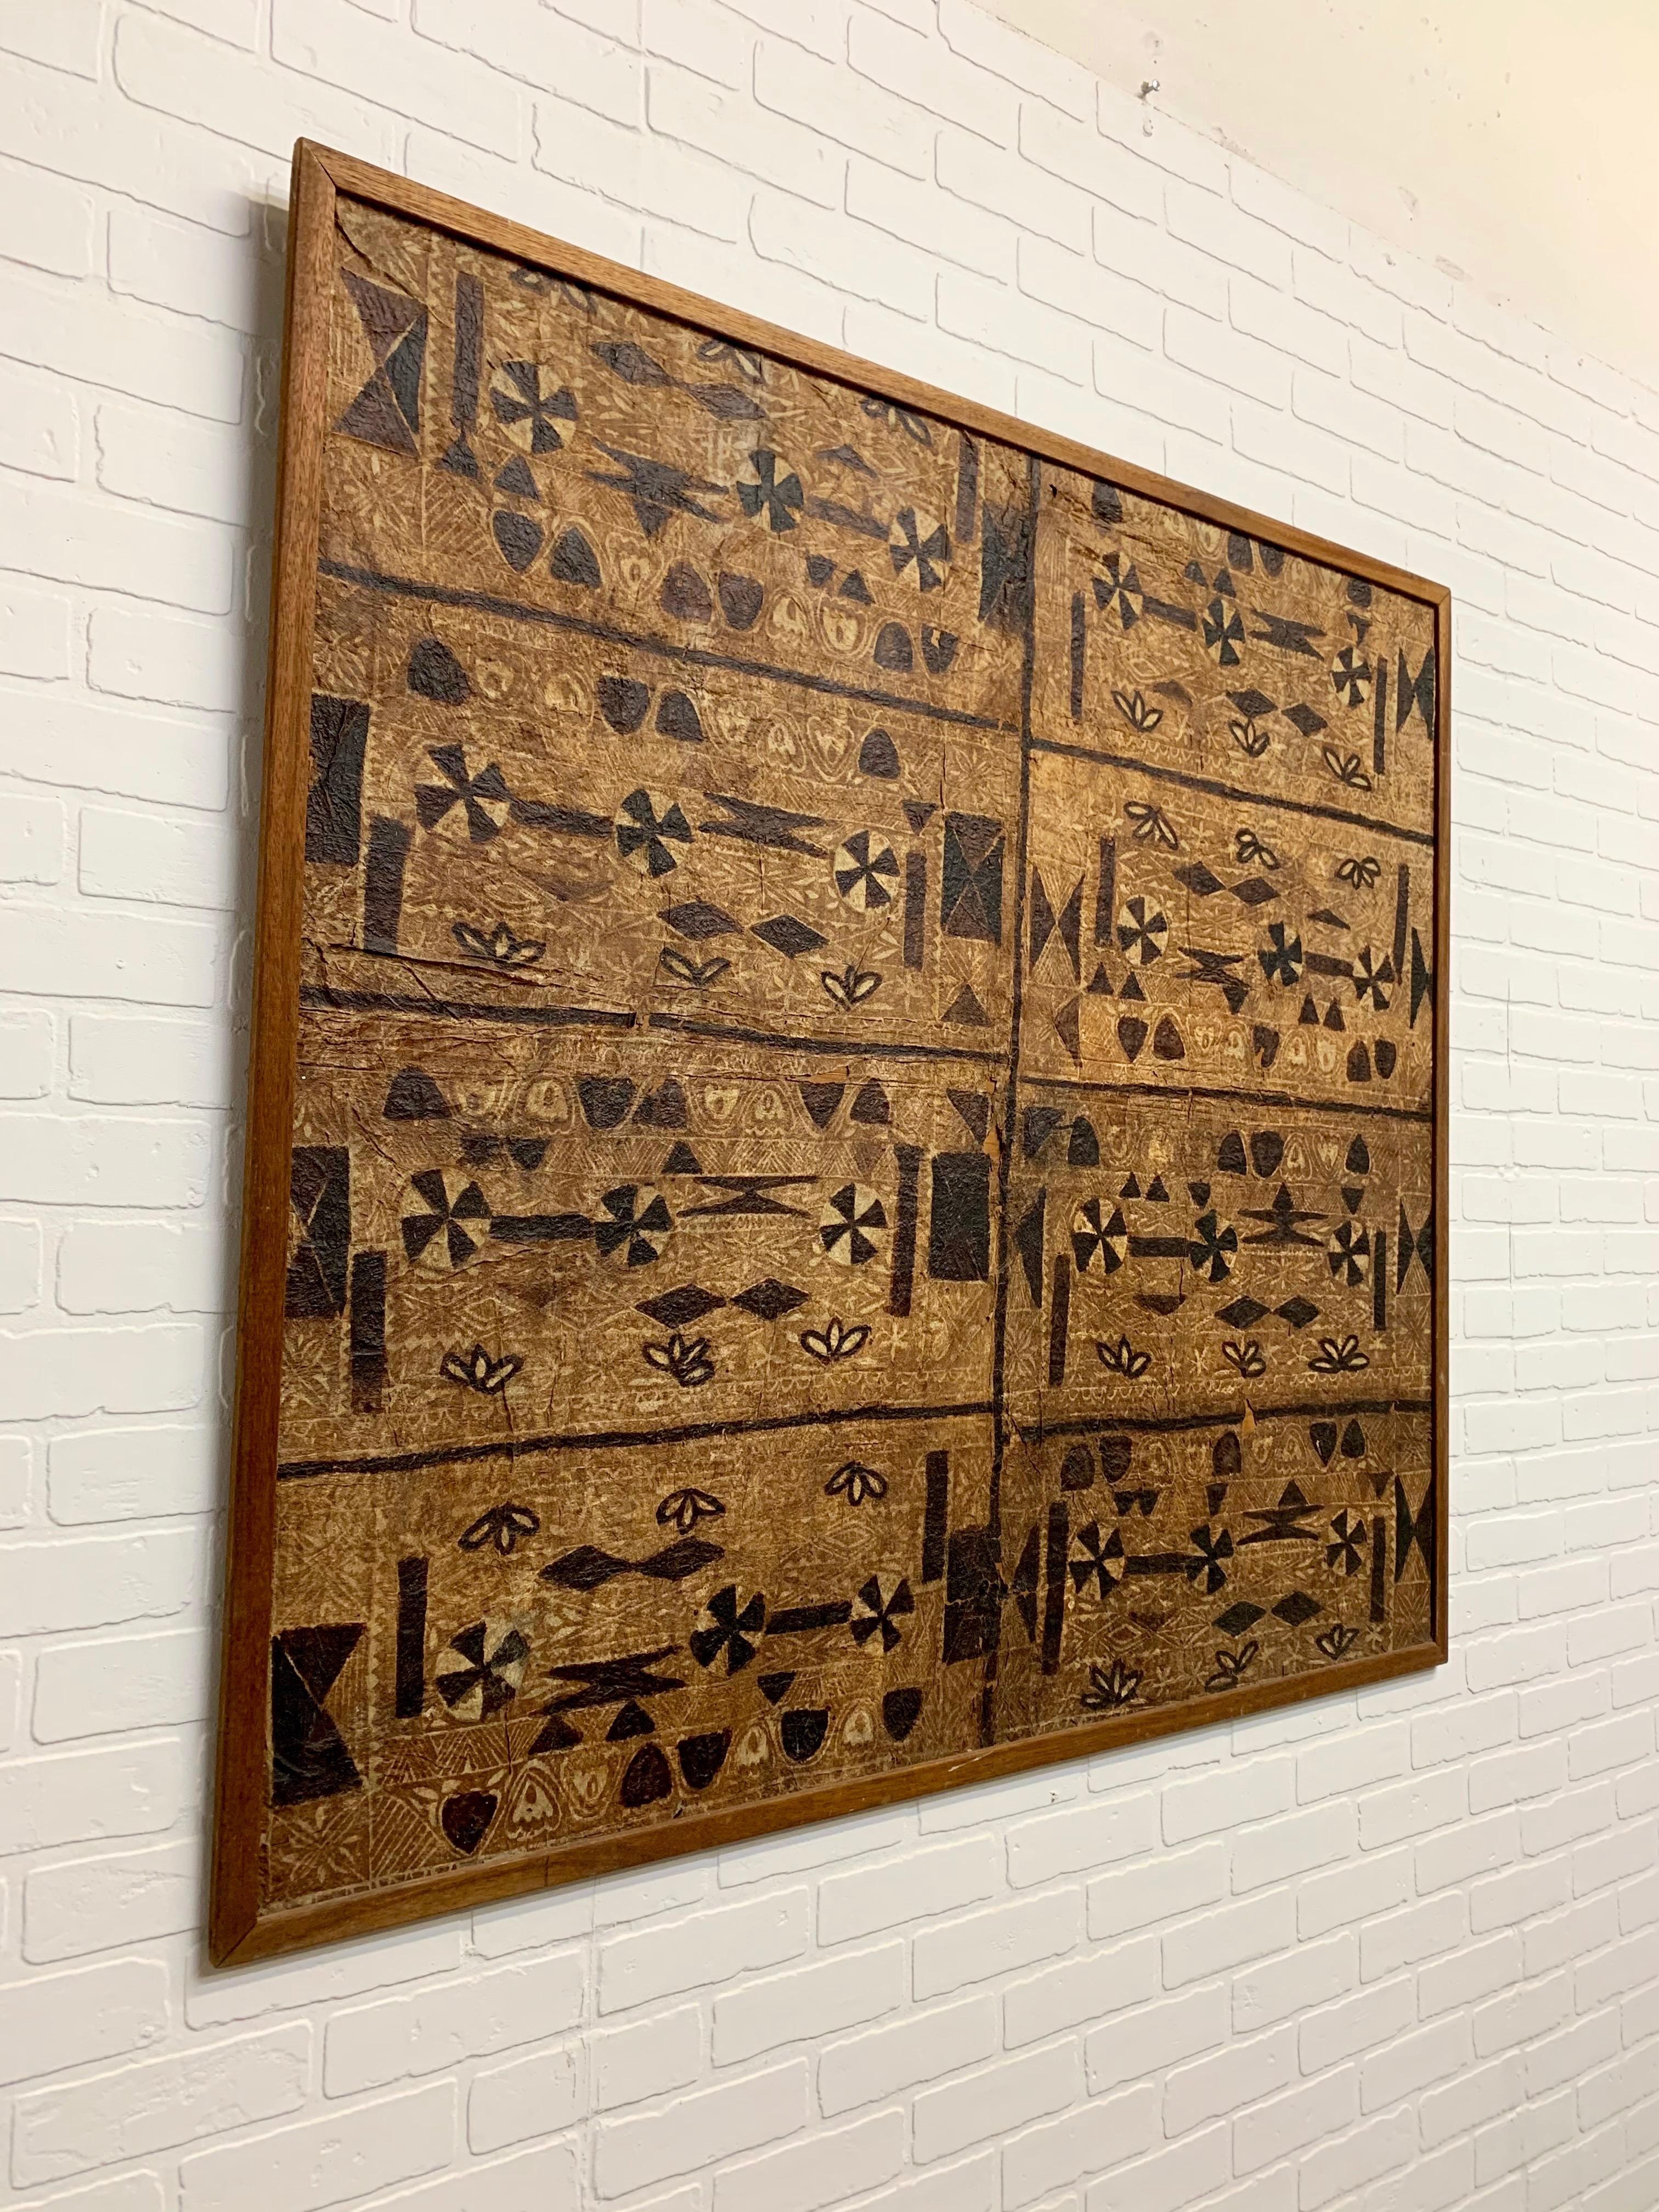 Bark cloth or tapa cloth mounted on plywood and trimmed in mahogany.

Bark cloth, or tapa, is not a woven material, but made from bark that has been softened through a process of soaking and beating. The inner bark is taken from several types of